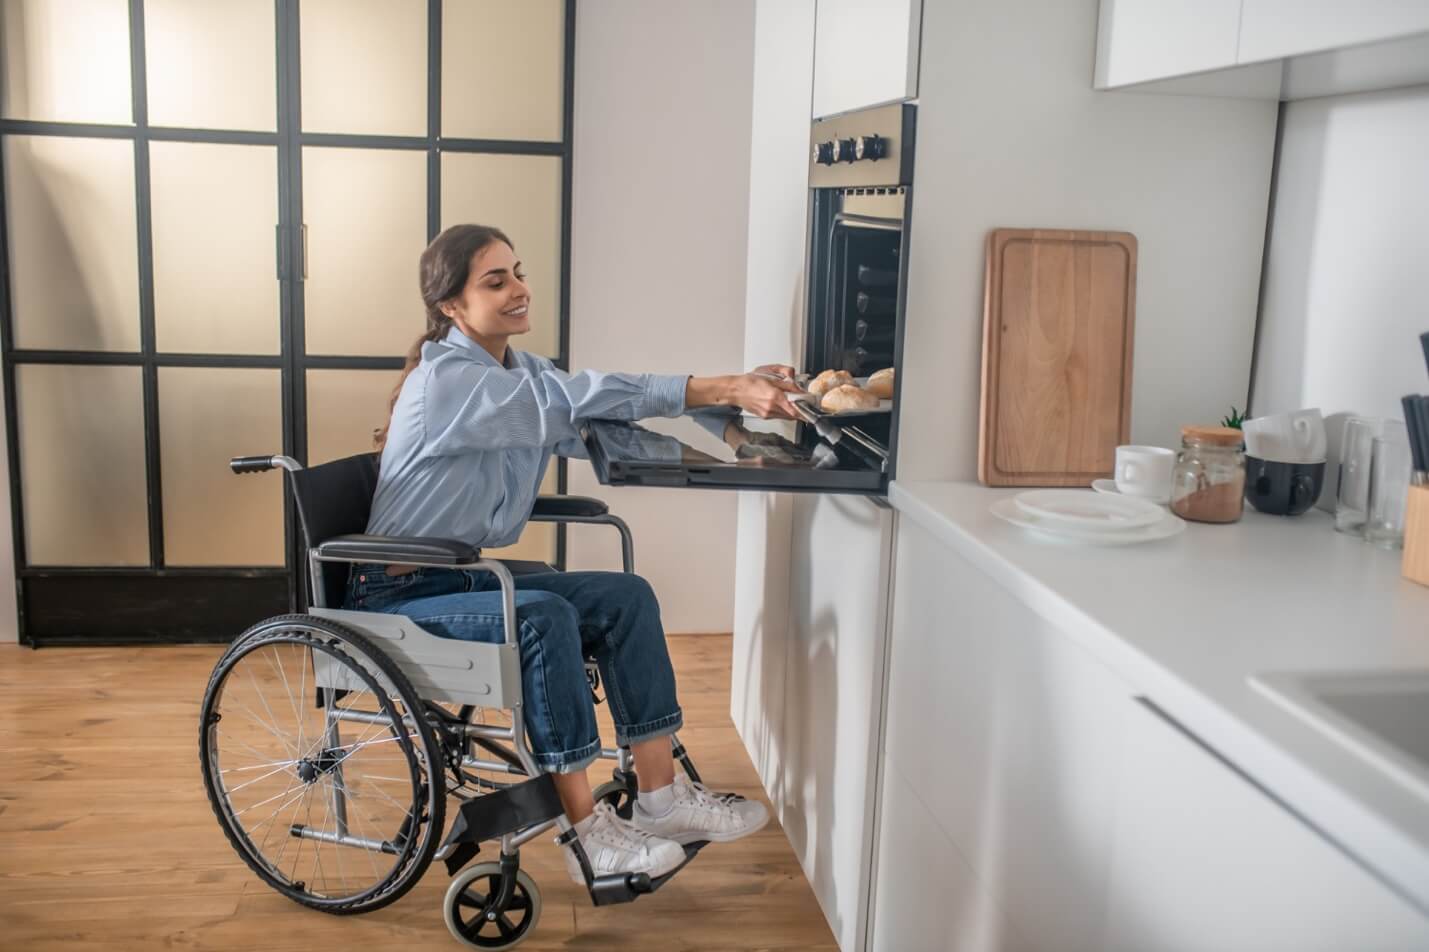 A person in a wheelchair opening an oven Description automatically generated